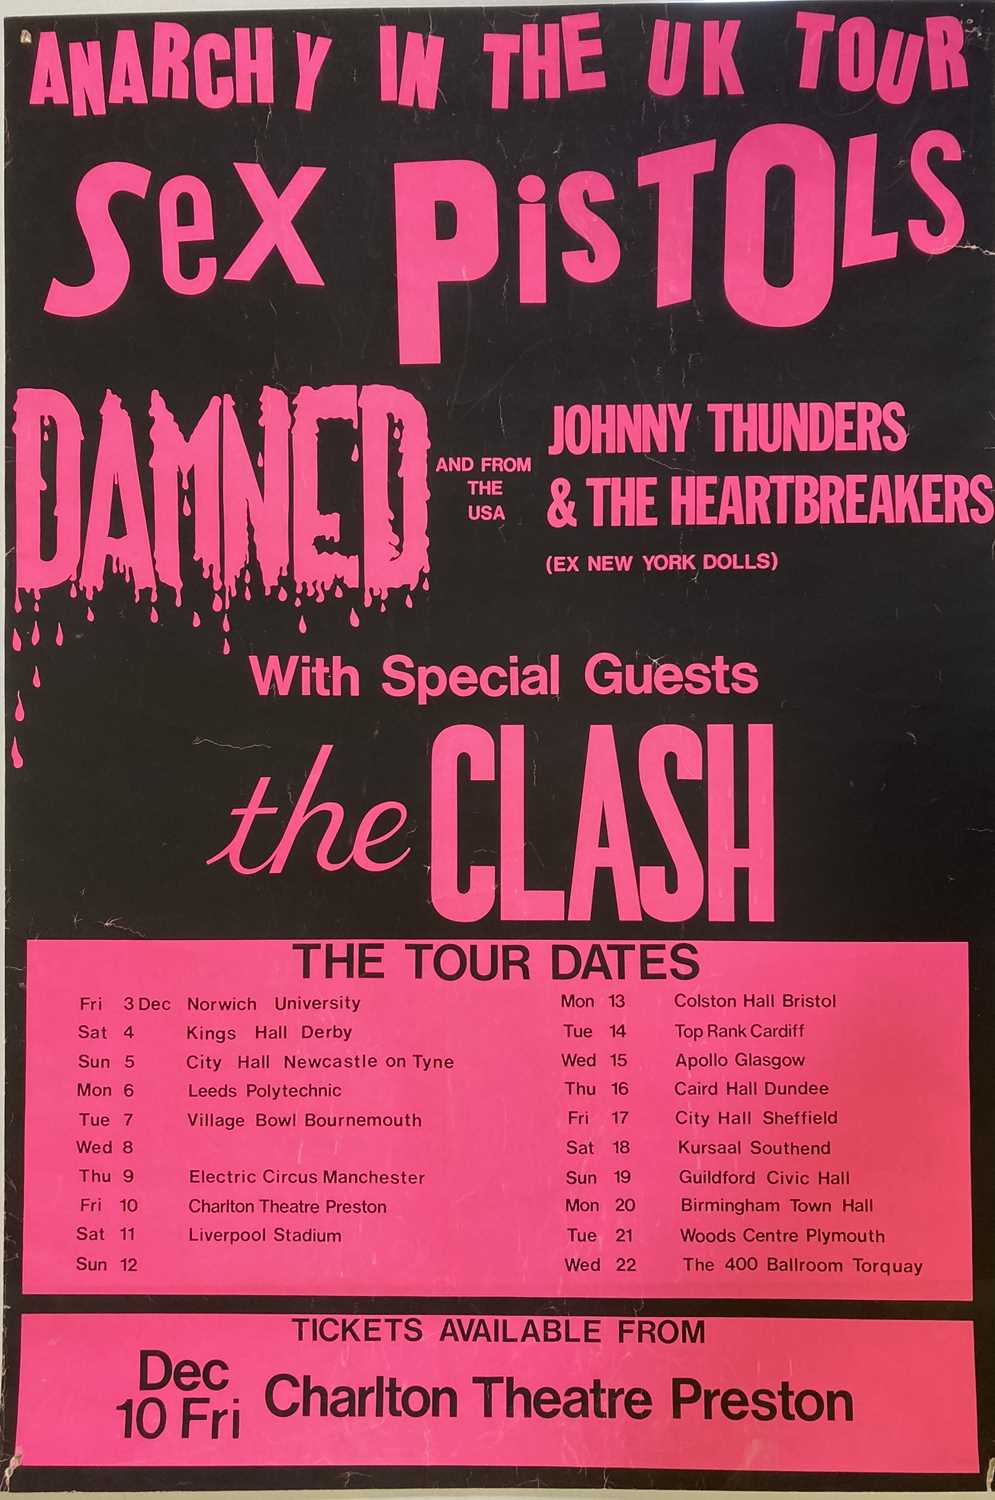 SEX PISTOLS ANARCHY IN THE UK TOUR POSTER - PRESTON. - Image 2 of 9